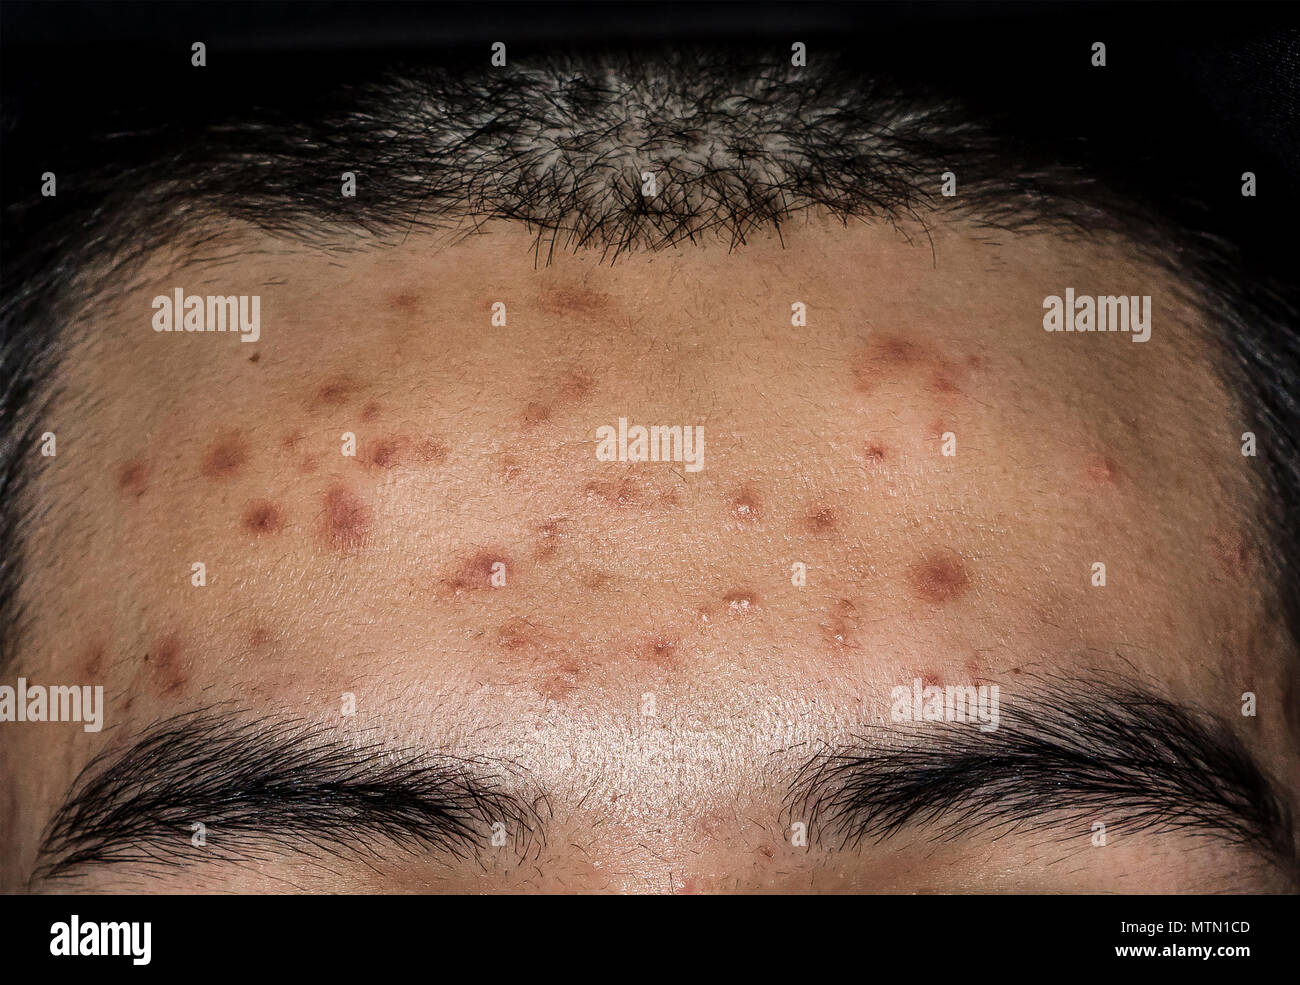 Close-up of acne on the skin, Acne on the face caused by Hormone, The scars, wrinkle and acne inflammation on the face skin Stock Photo